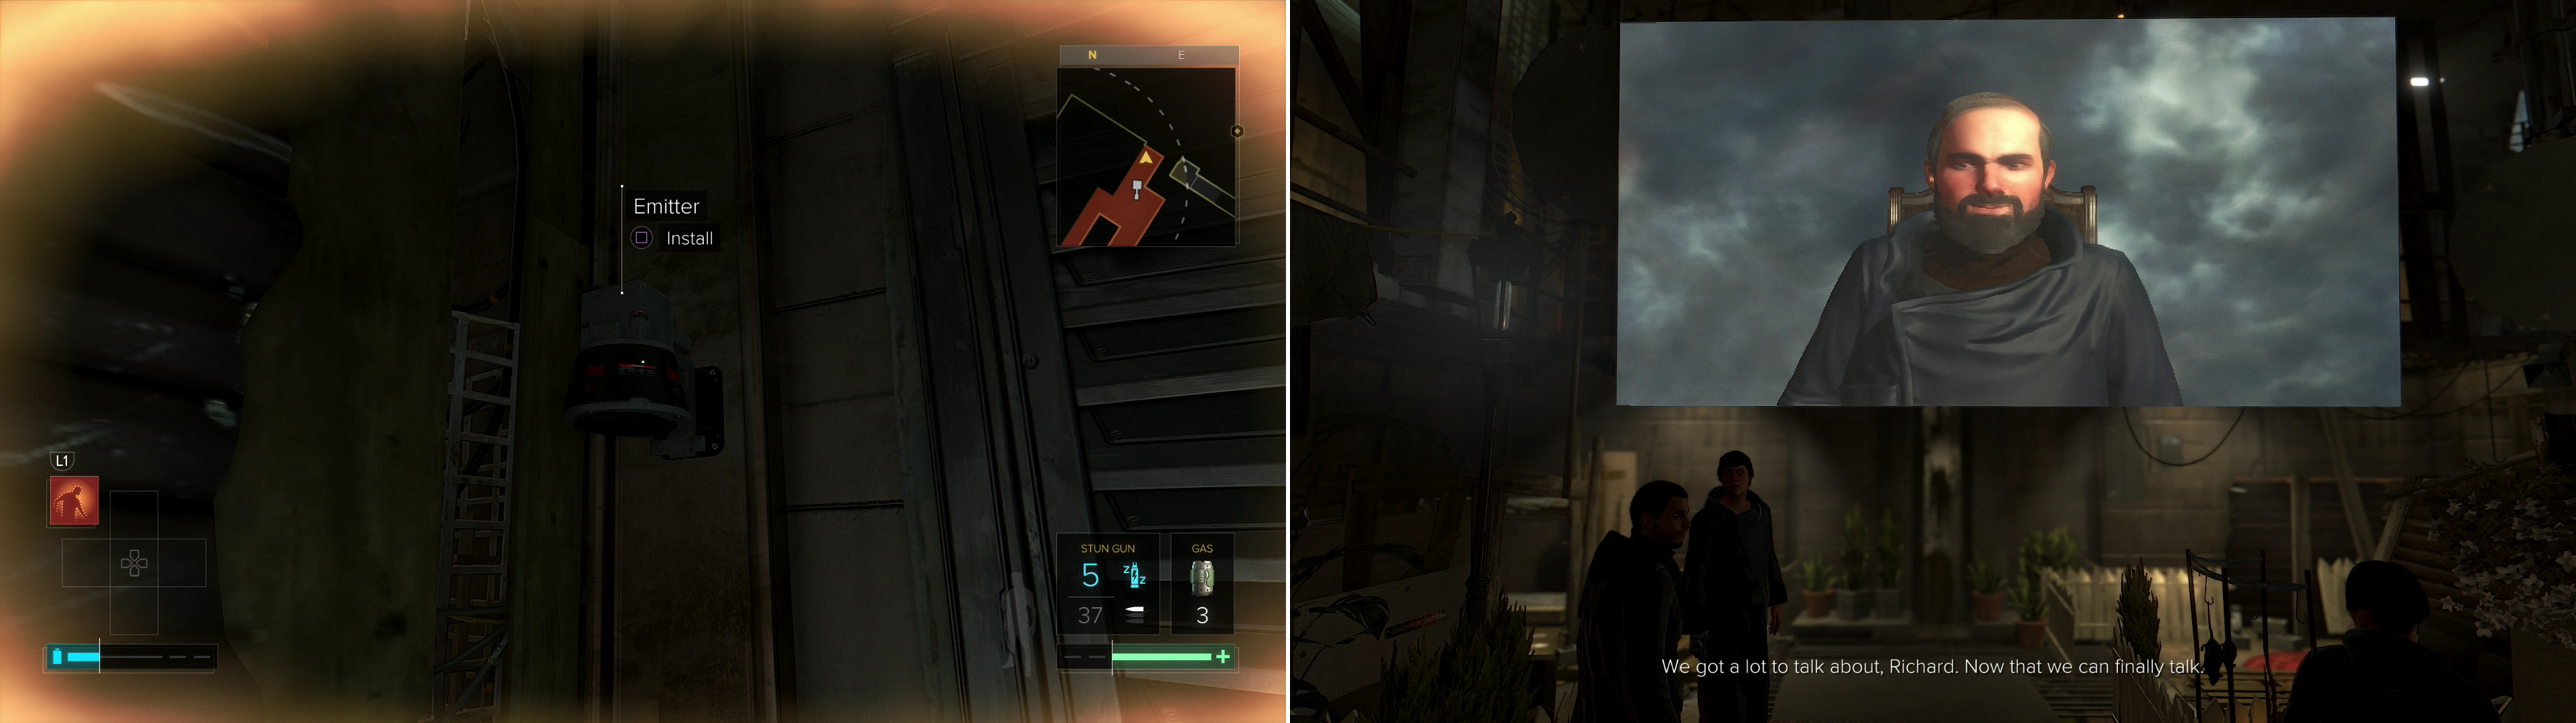 Plant the Scrambling Devices to neutralize Richard’s Emitters (left) then, with your faculties restored, confront Richard in a war of words (right).